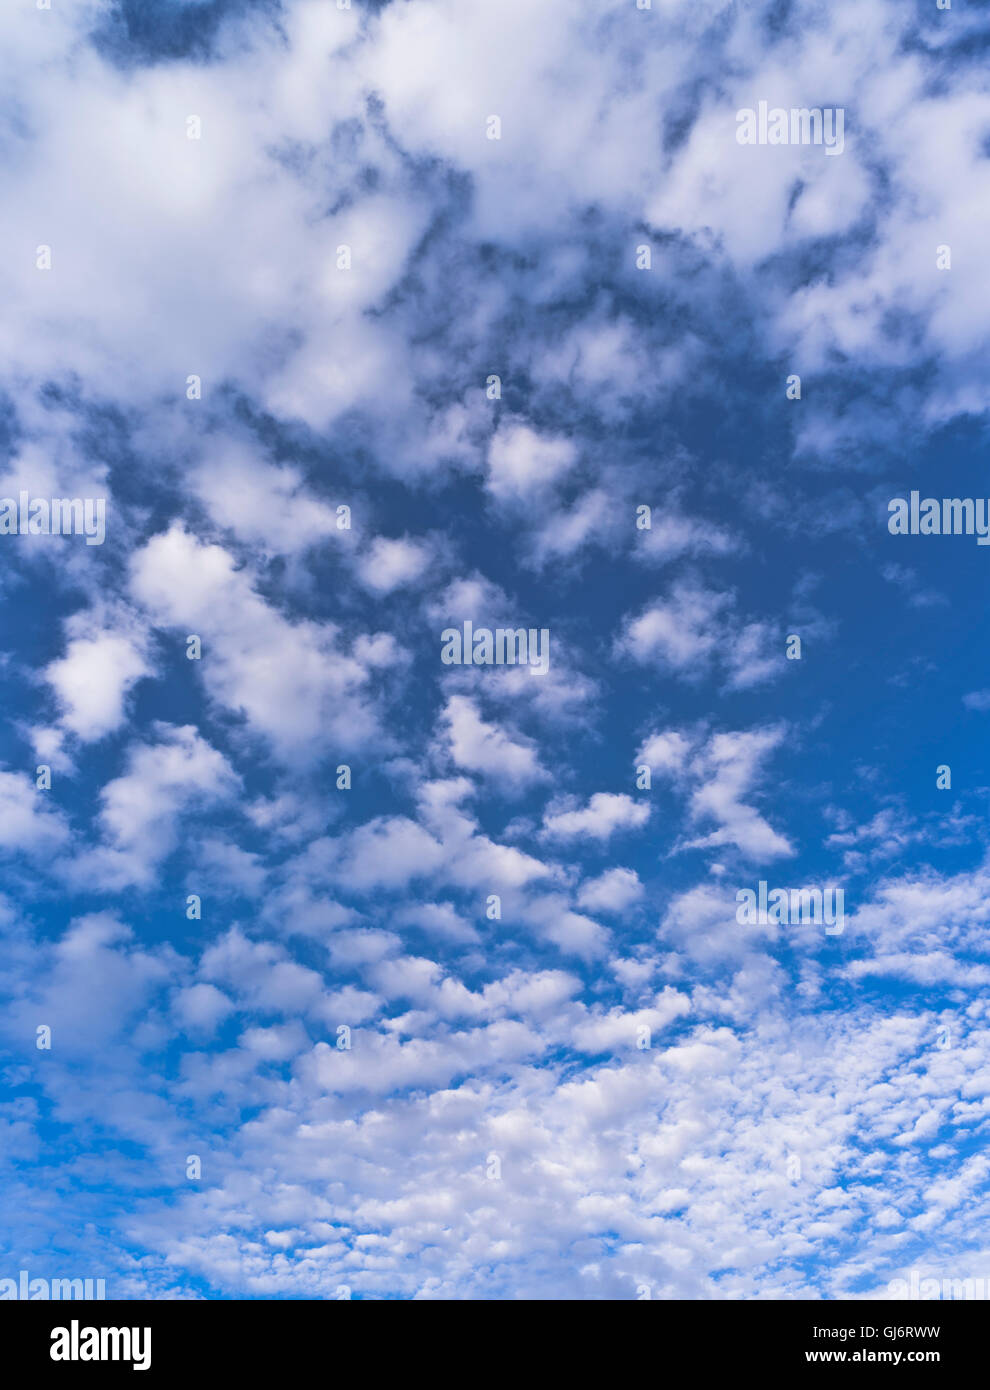 dh Clouds SKY UK White fluffy clouds background cloud over blue sky skyscape with nobody Stock Photo